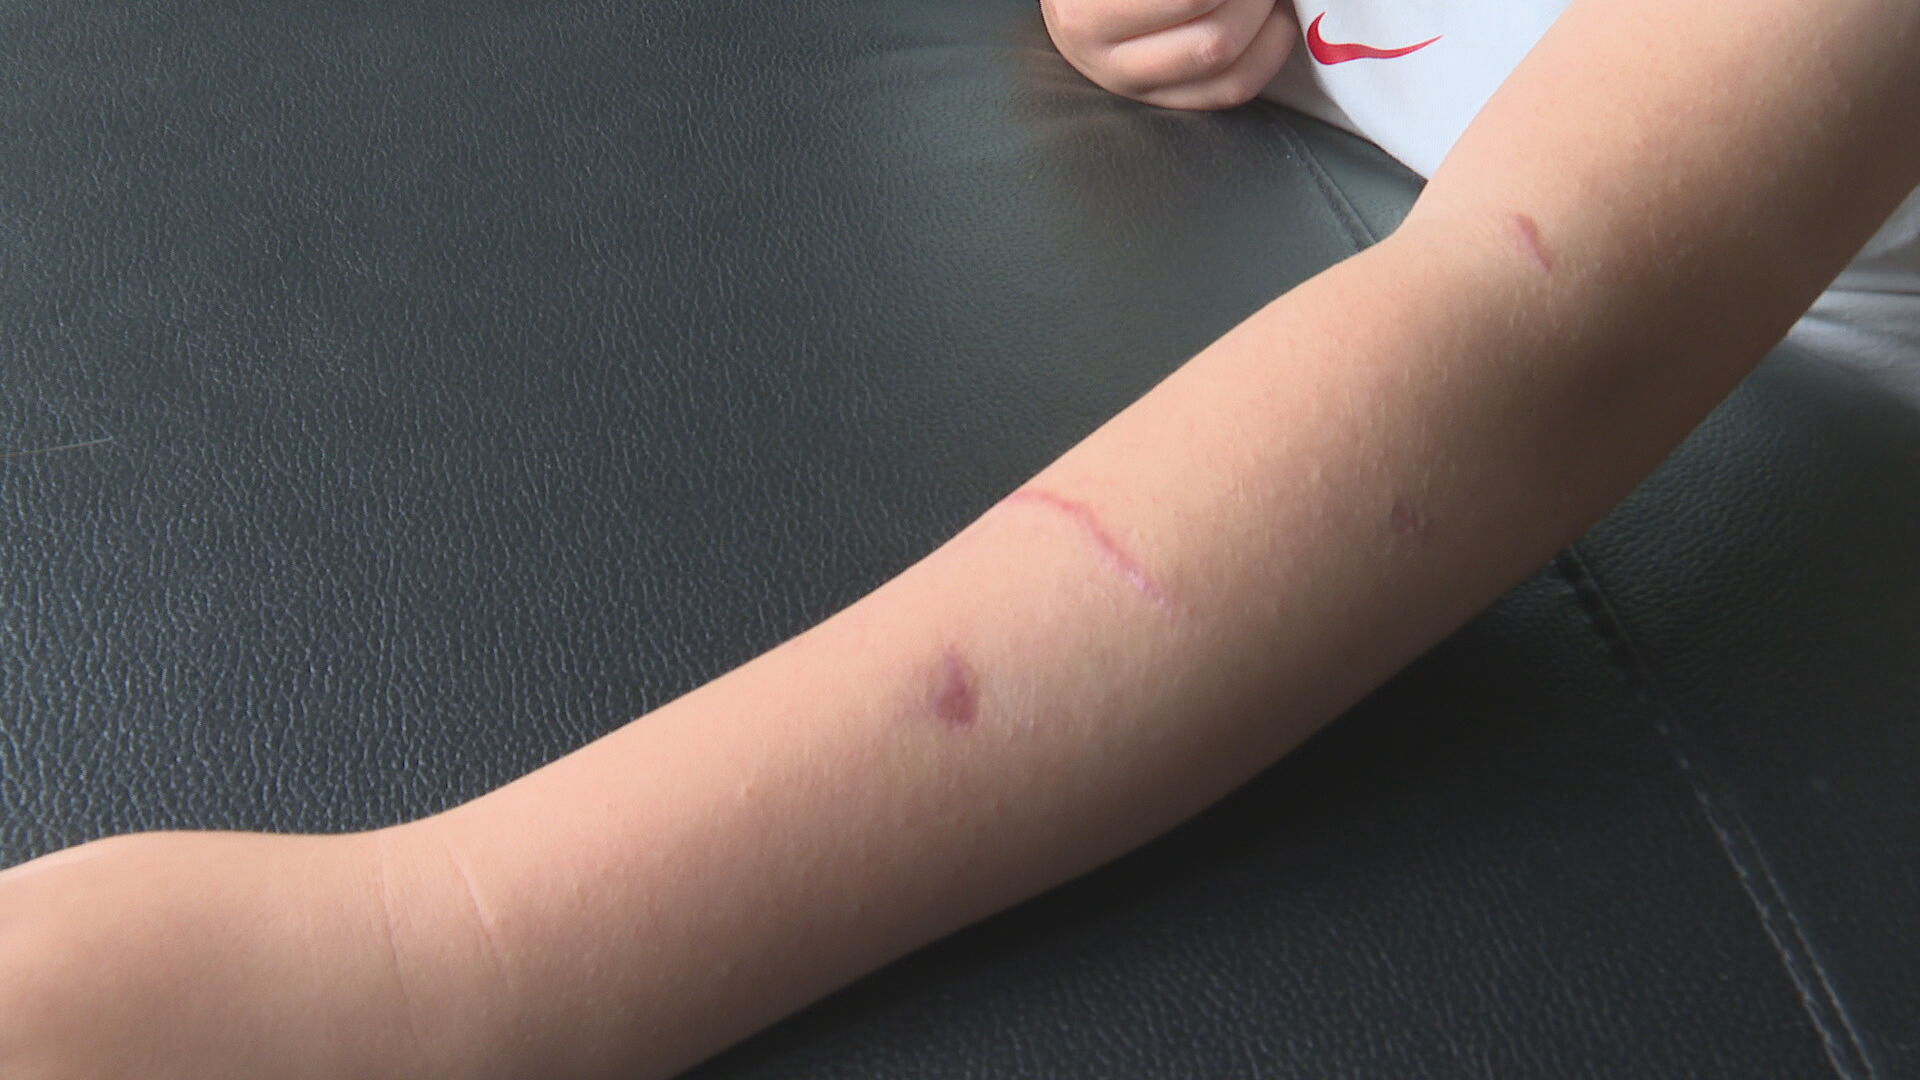 The boy has scarring on his left arm following the attack.